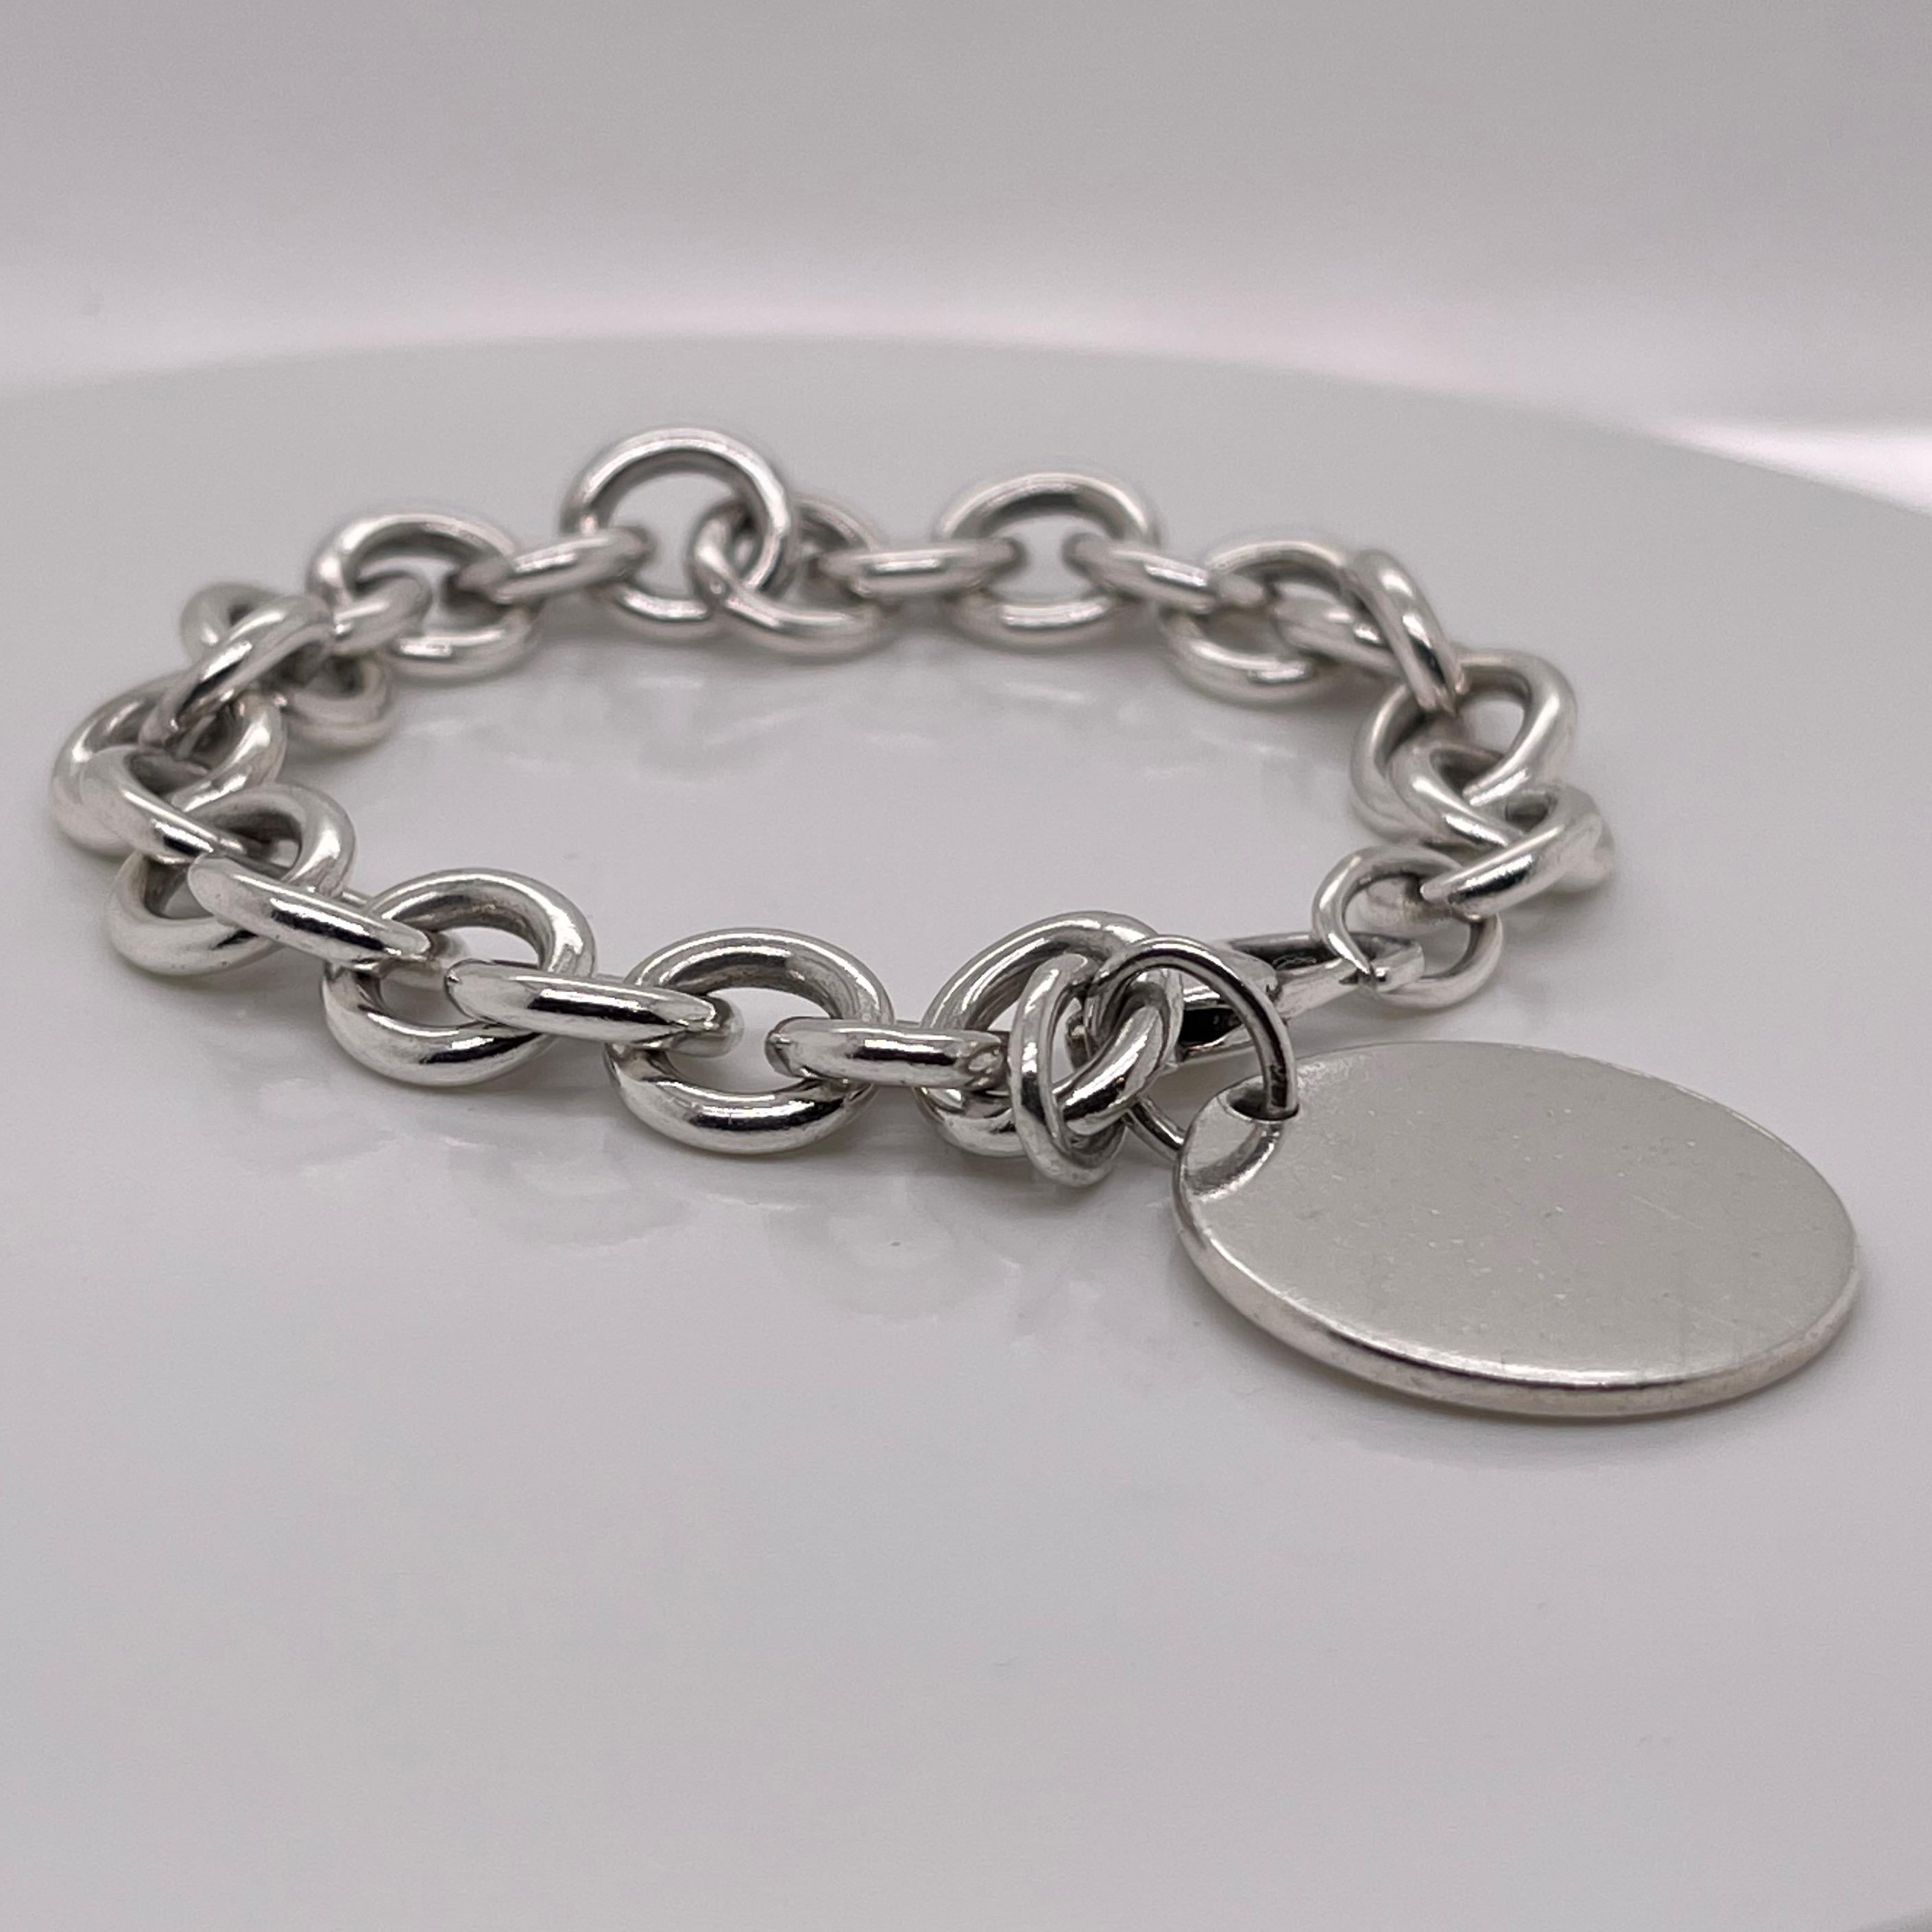 Vintage Tiffany & Co. Sterling Silver Dog Chain Link Bracelet with Round Charm In Good Condition For Sale In Philadelphia, PA